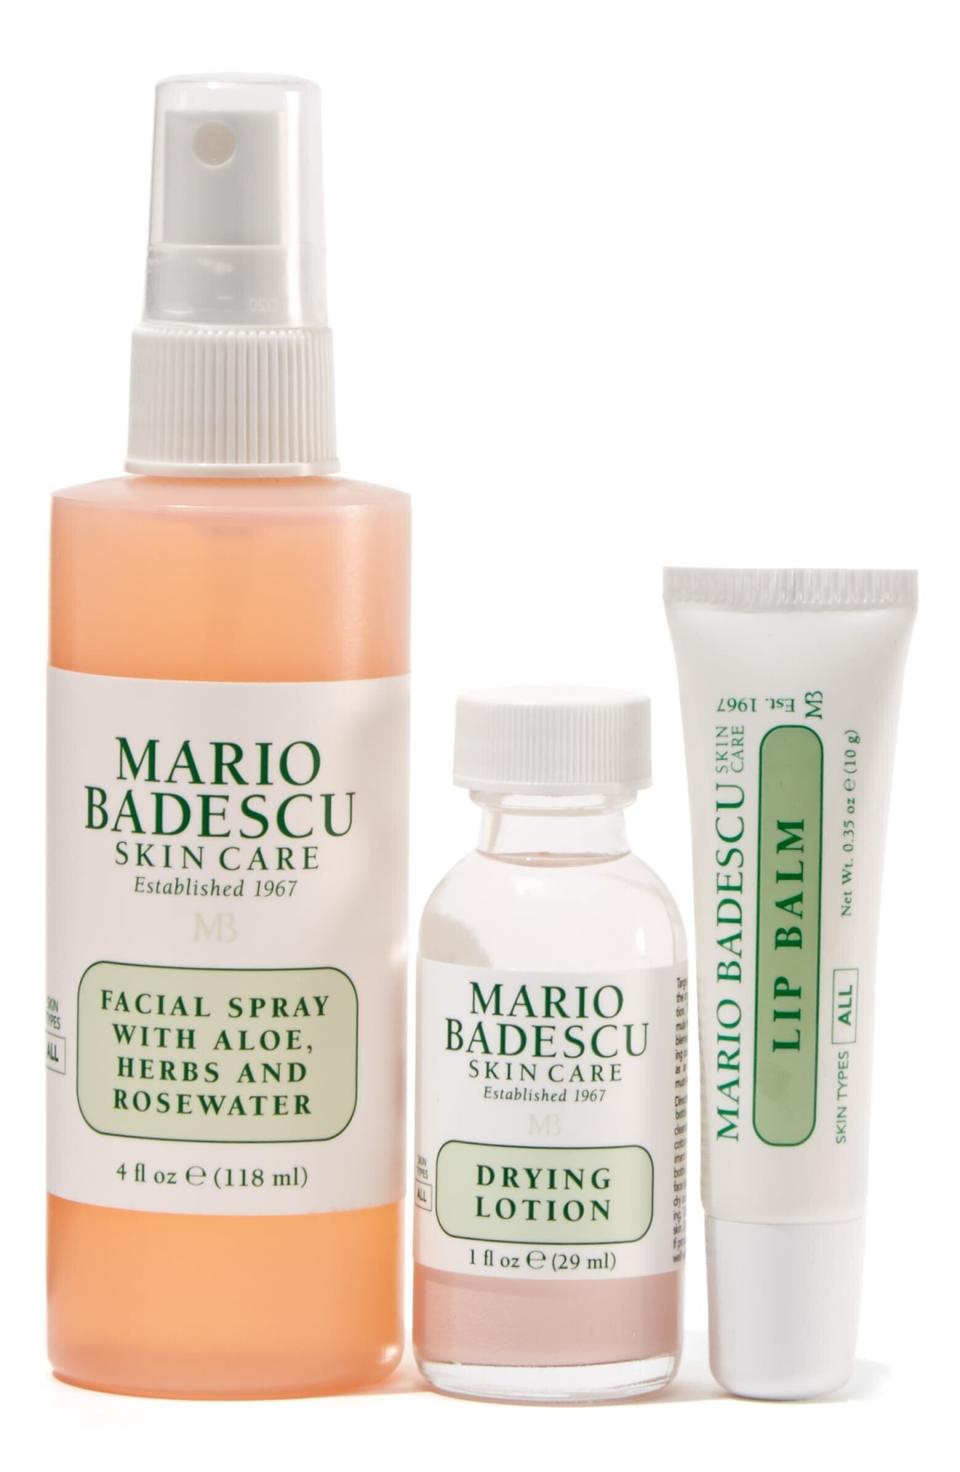 Save on the brand's refreshing facial spray and <strong><a href="https://www.huffpost.com/entry/mario-badescu-drying-lotion-on-sale-for-just-8-at-ulta_l_5c9e3048e4b0474c08cd6f34" target="_blank" rel="noopener noreferrer">pimple-shrinking drying lotion</a></strong>.&nbsp;<strong><a href="https://fave.co/2O2Qtuk" target="_blank" rel="noopener noreferrer">Normally $33, get it on sale for $23 during the Nordstrom Anniversary Sale</a>.</strong>